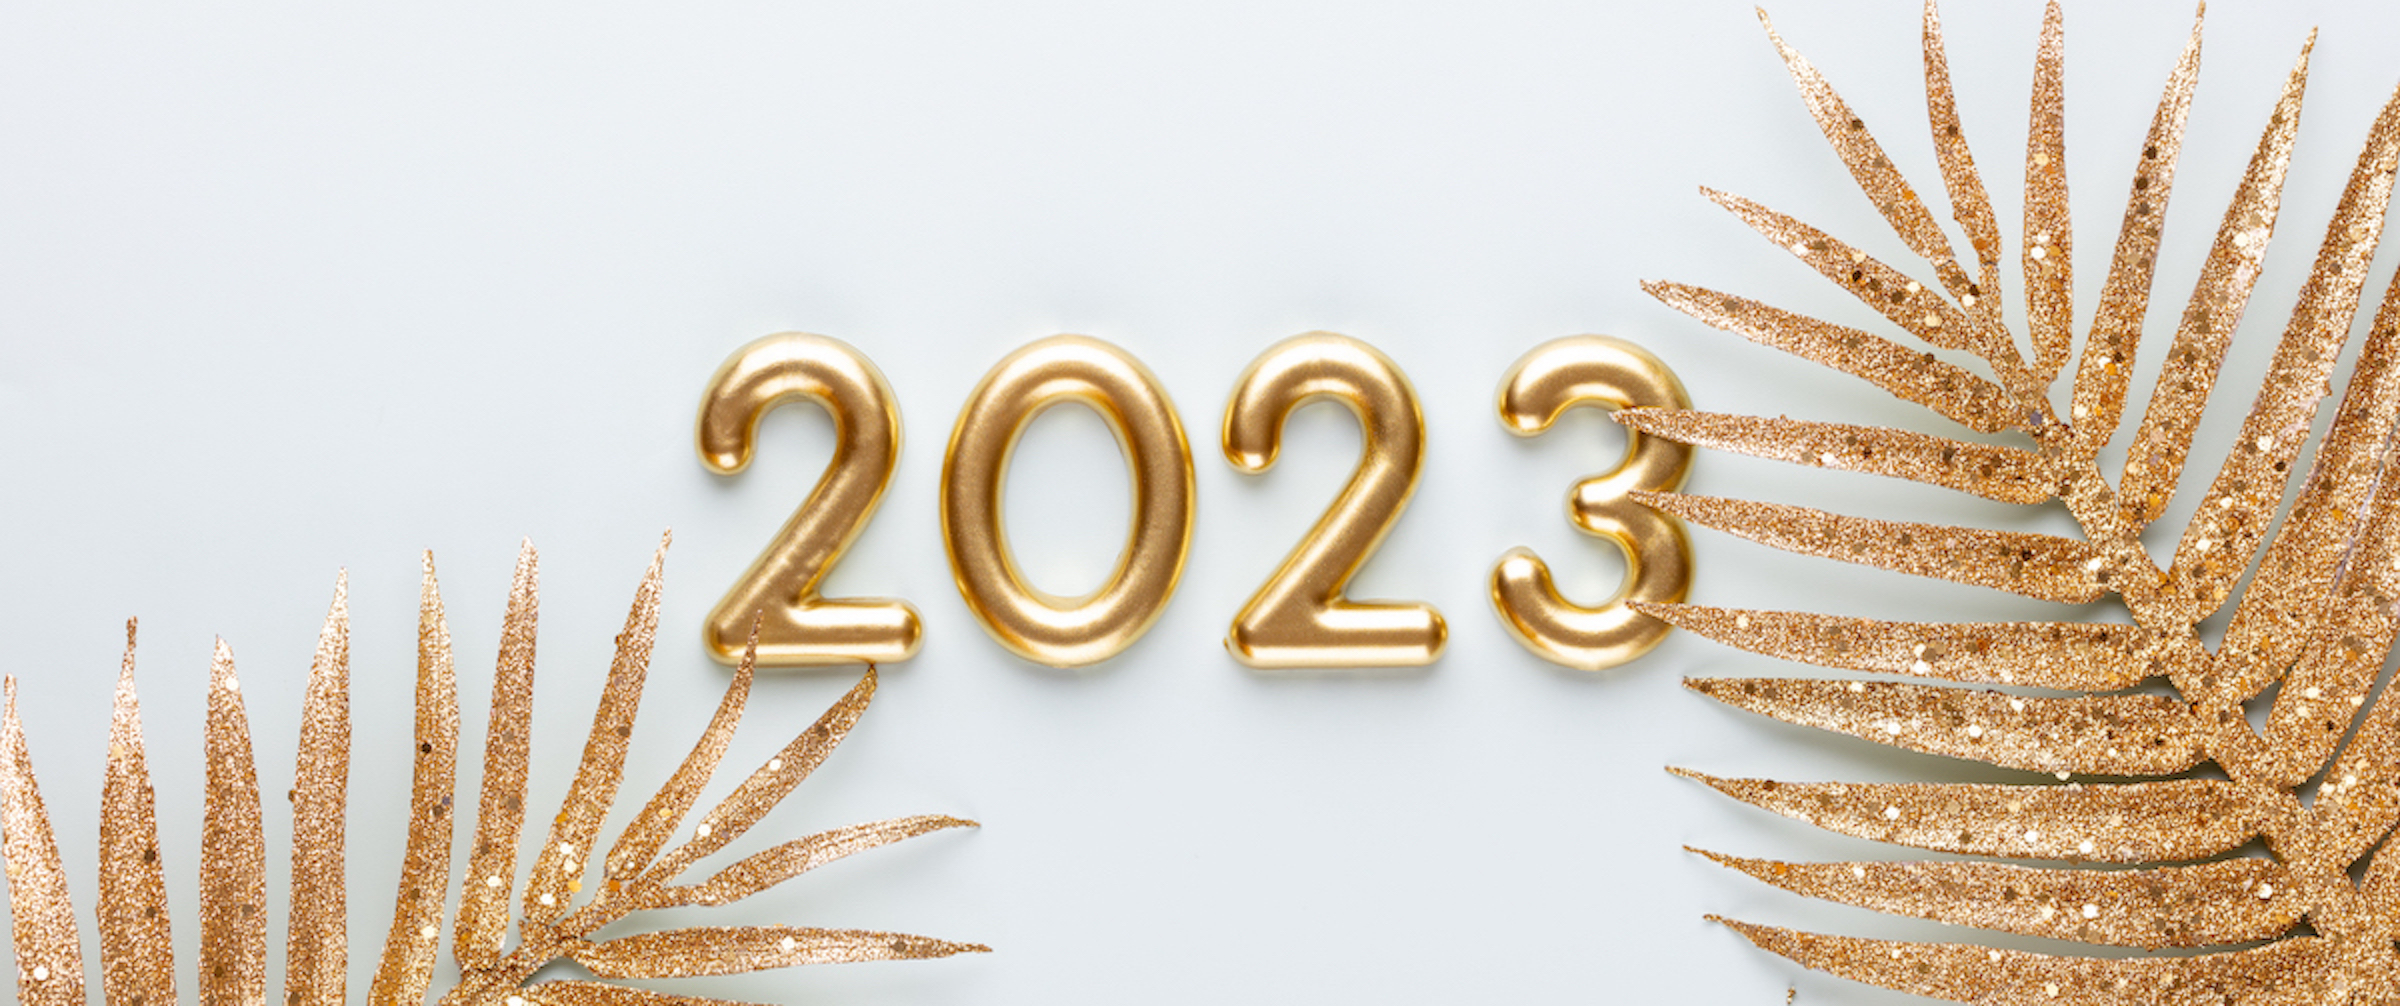 A gold and white graphic celebrating the year.